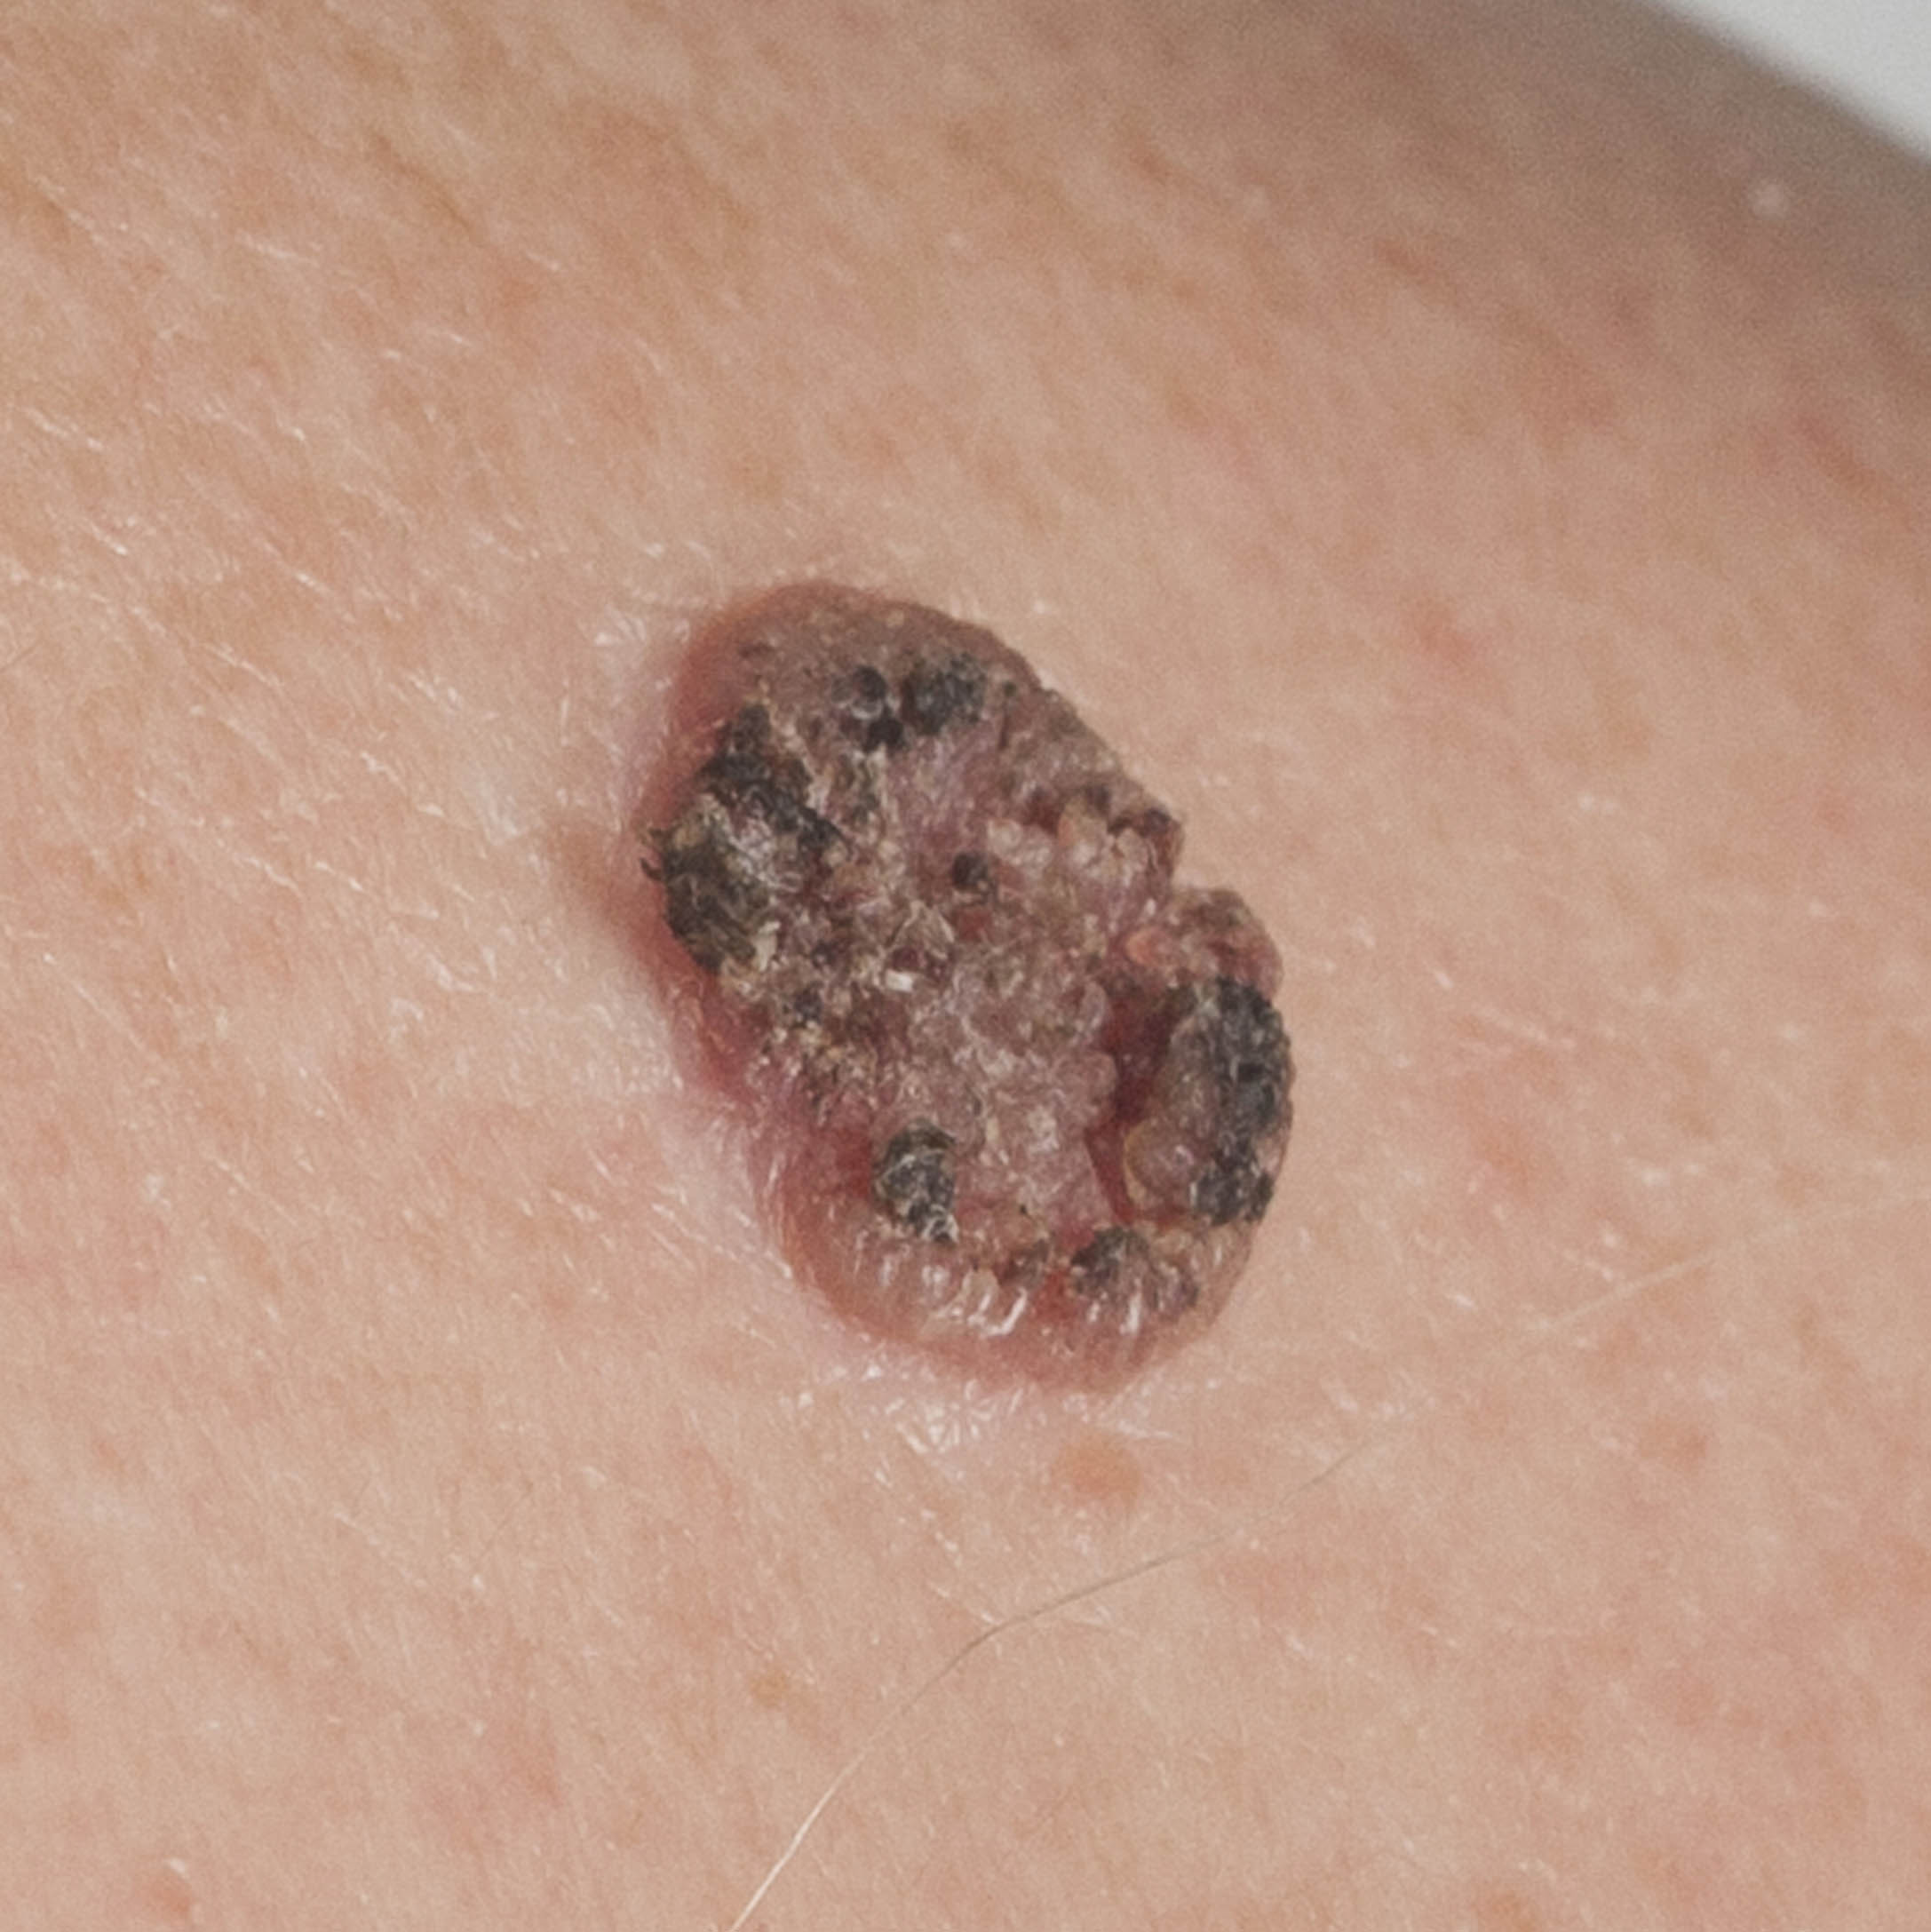 Squamous Cell Skin Cancer